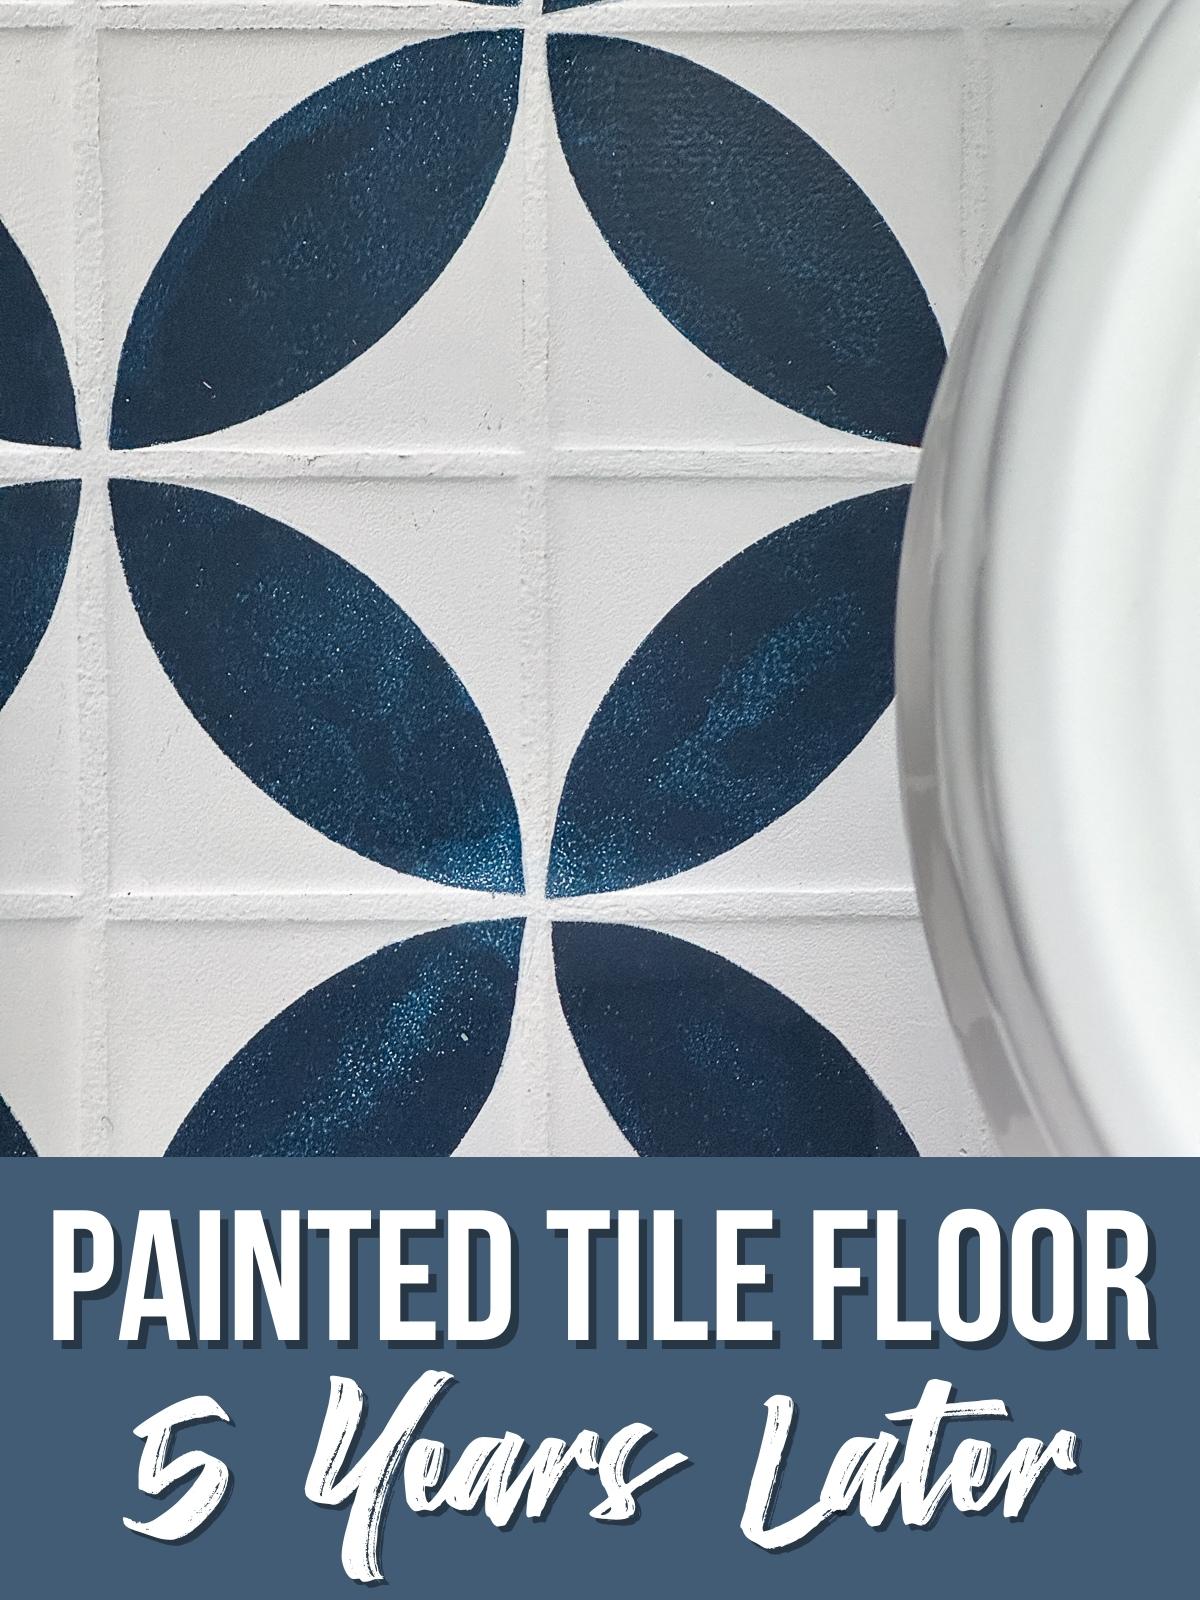 close up view of painted tile floor with text overlay